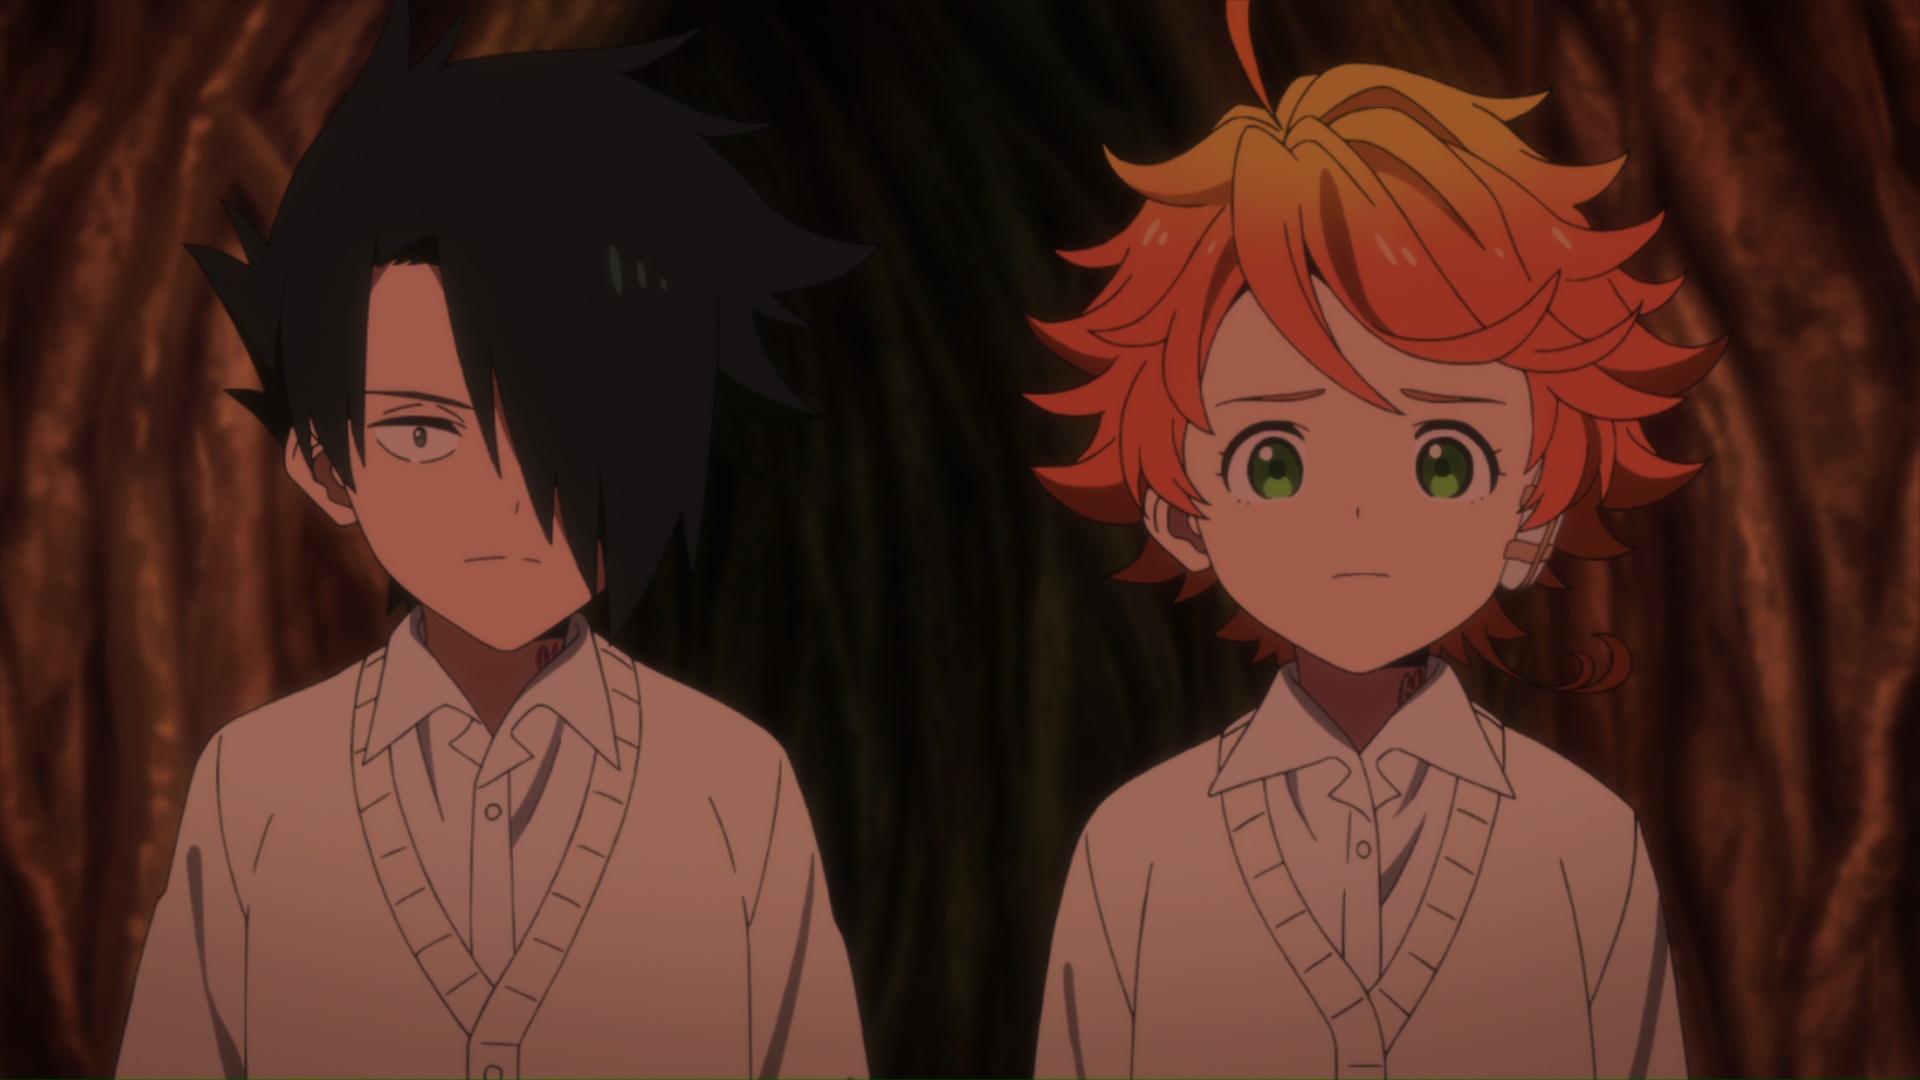 What Happened To The Promised Neverland: Season 2? – The